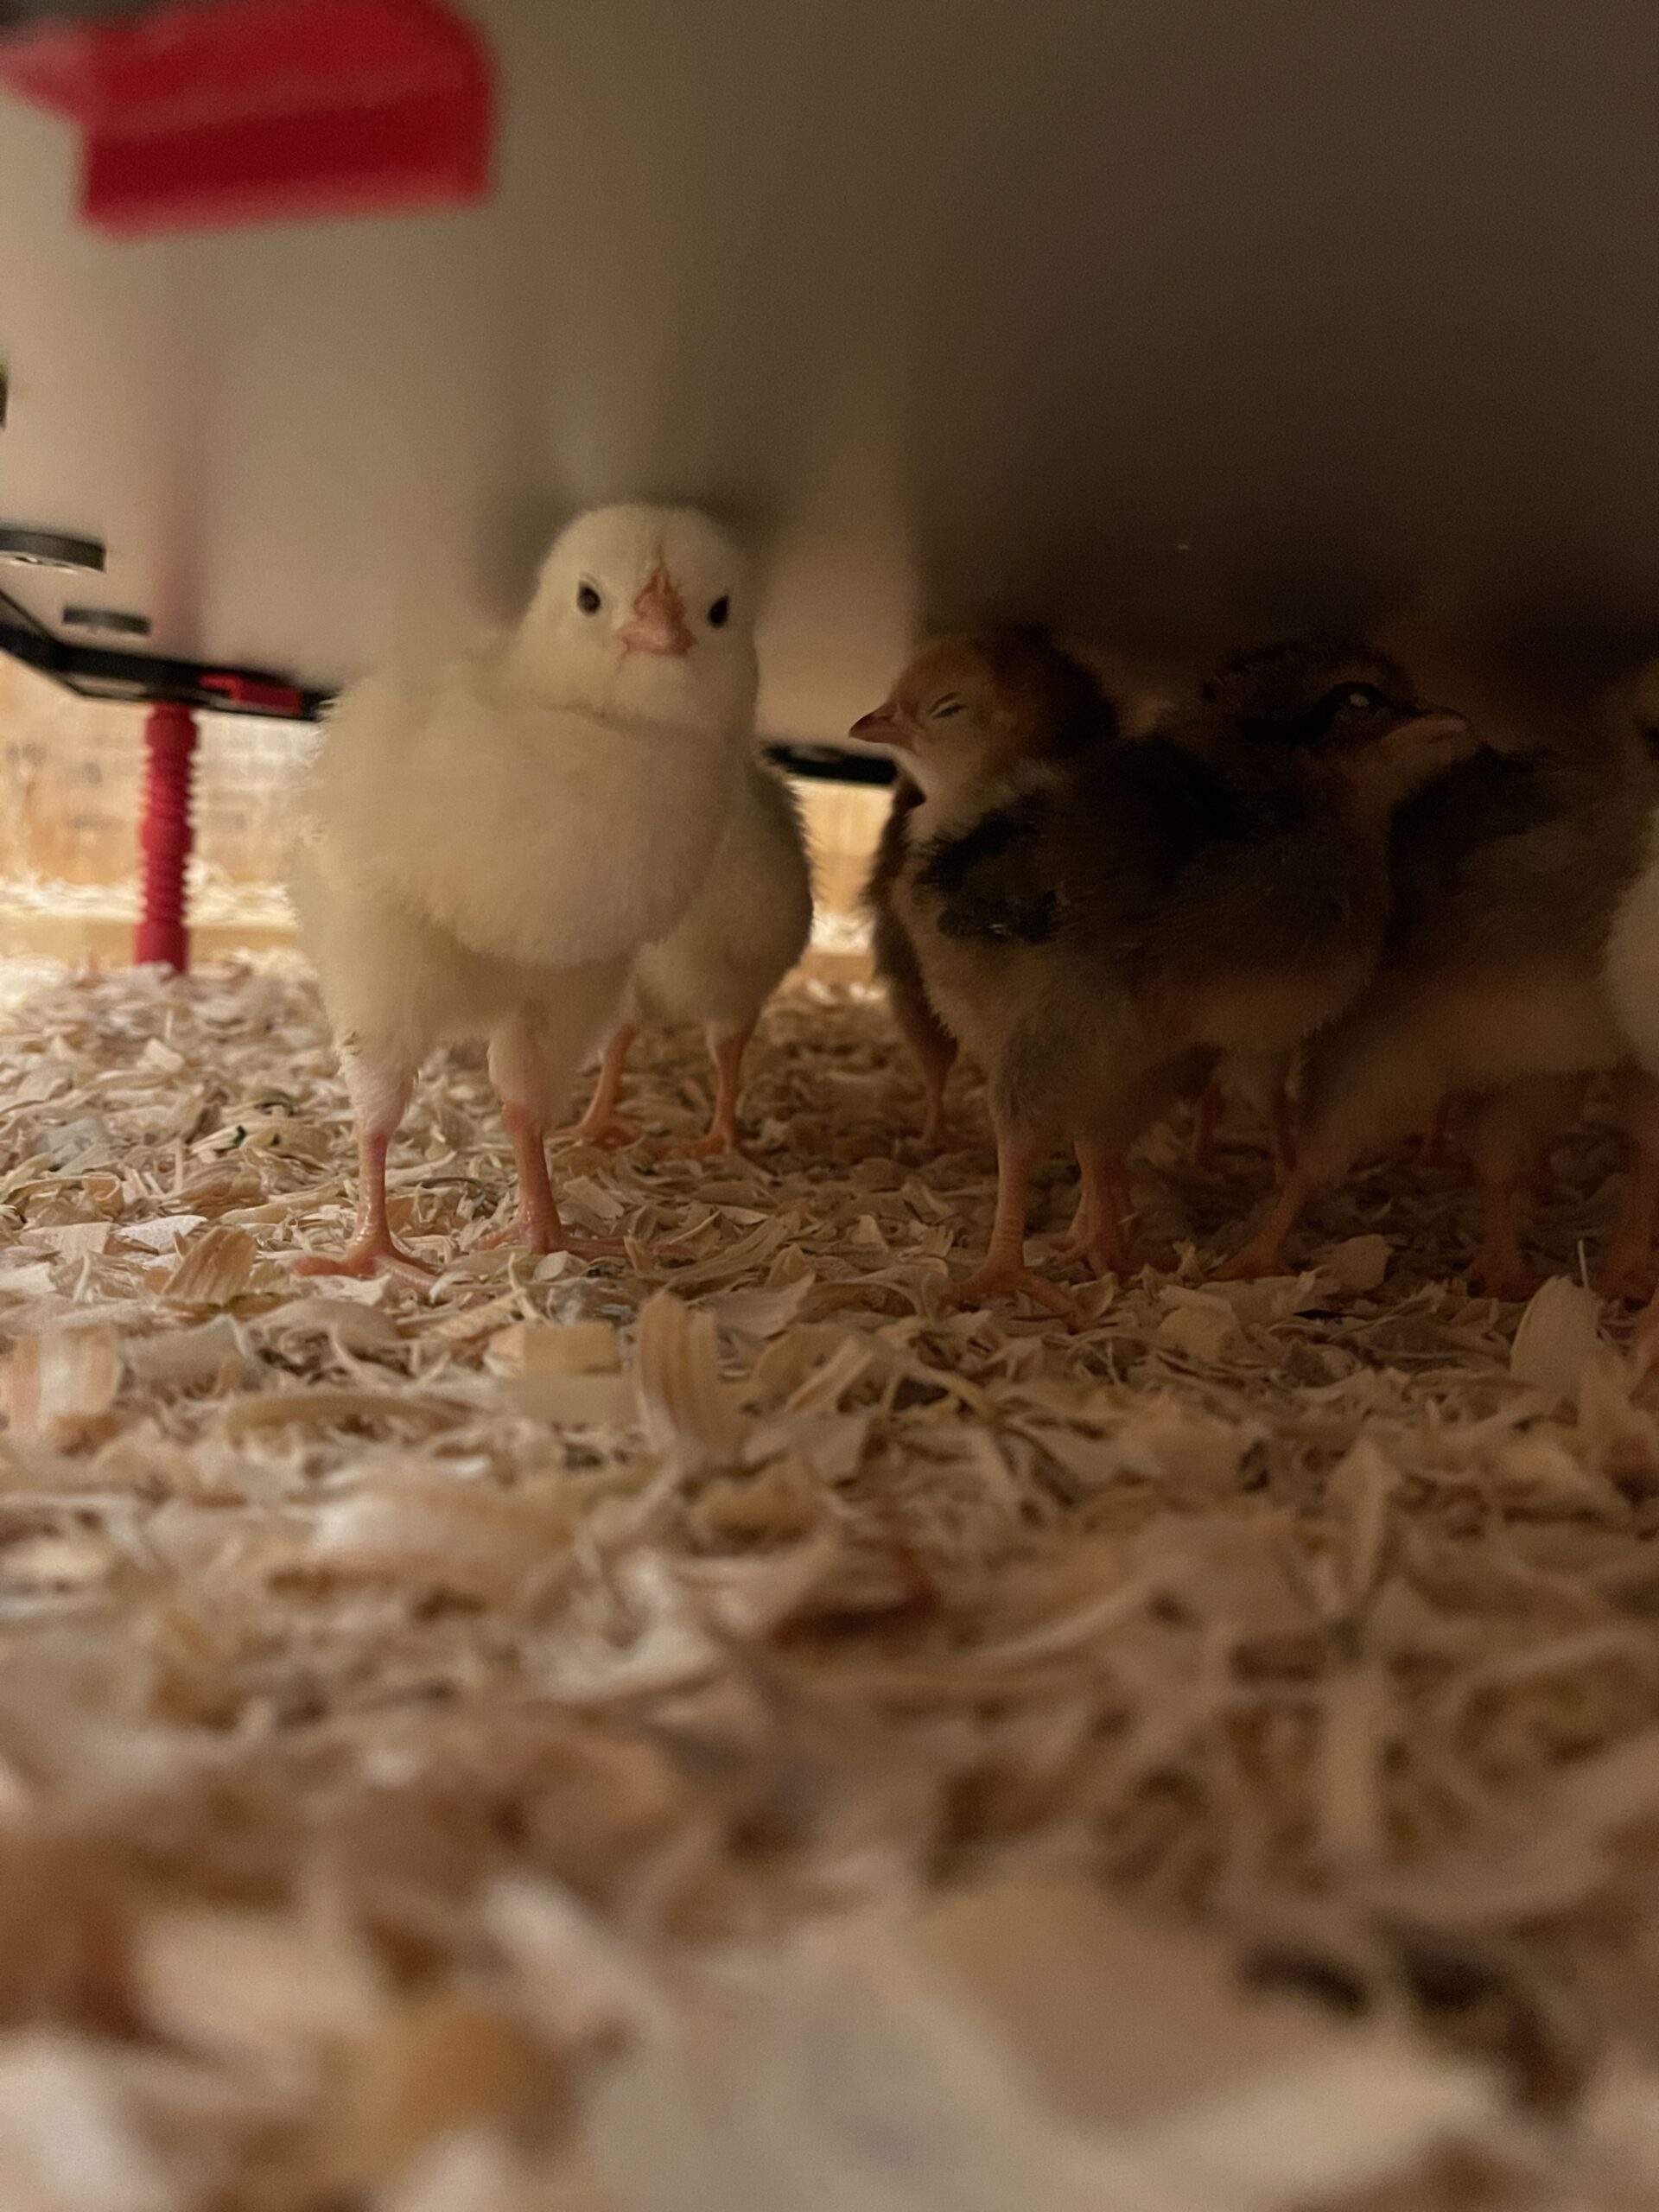 Chicks can touch the surface of the heating plate without getting burned